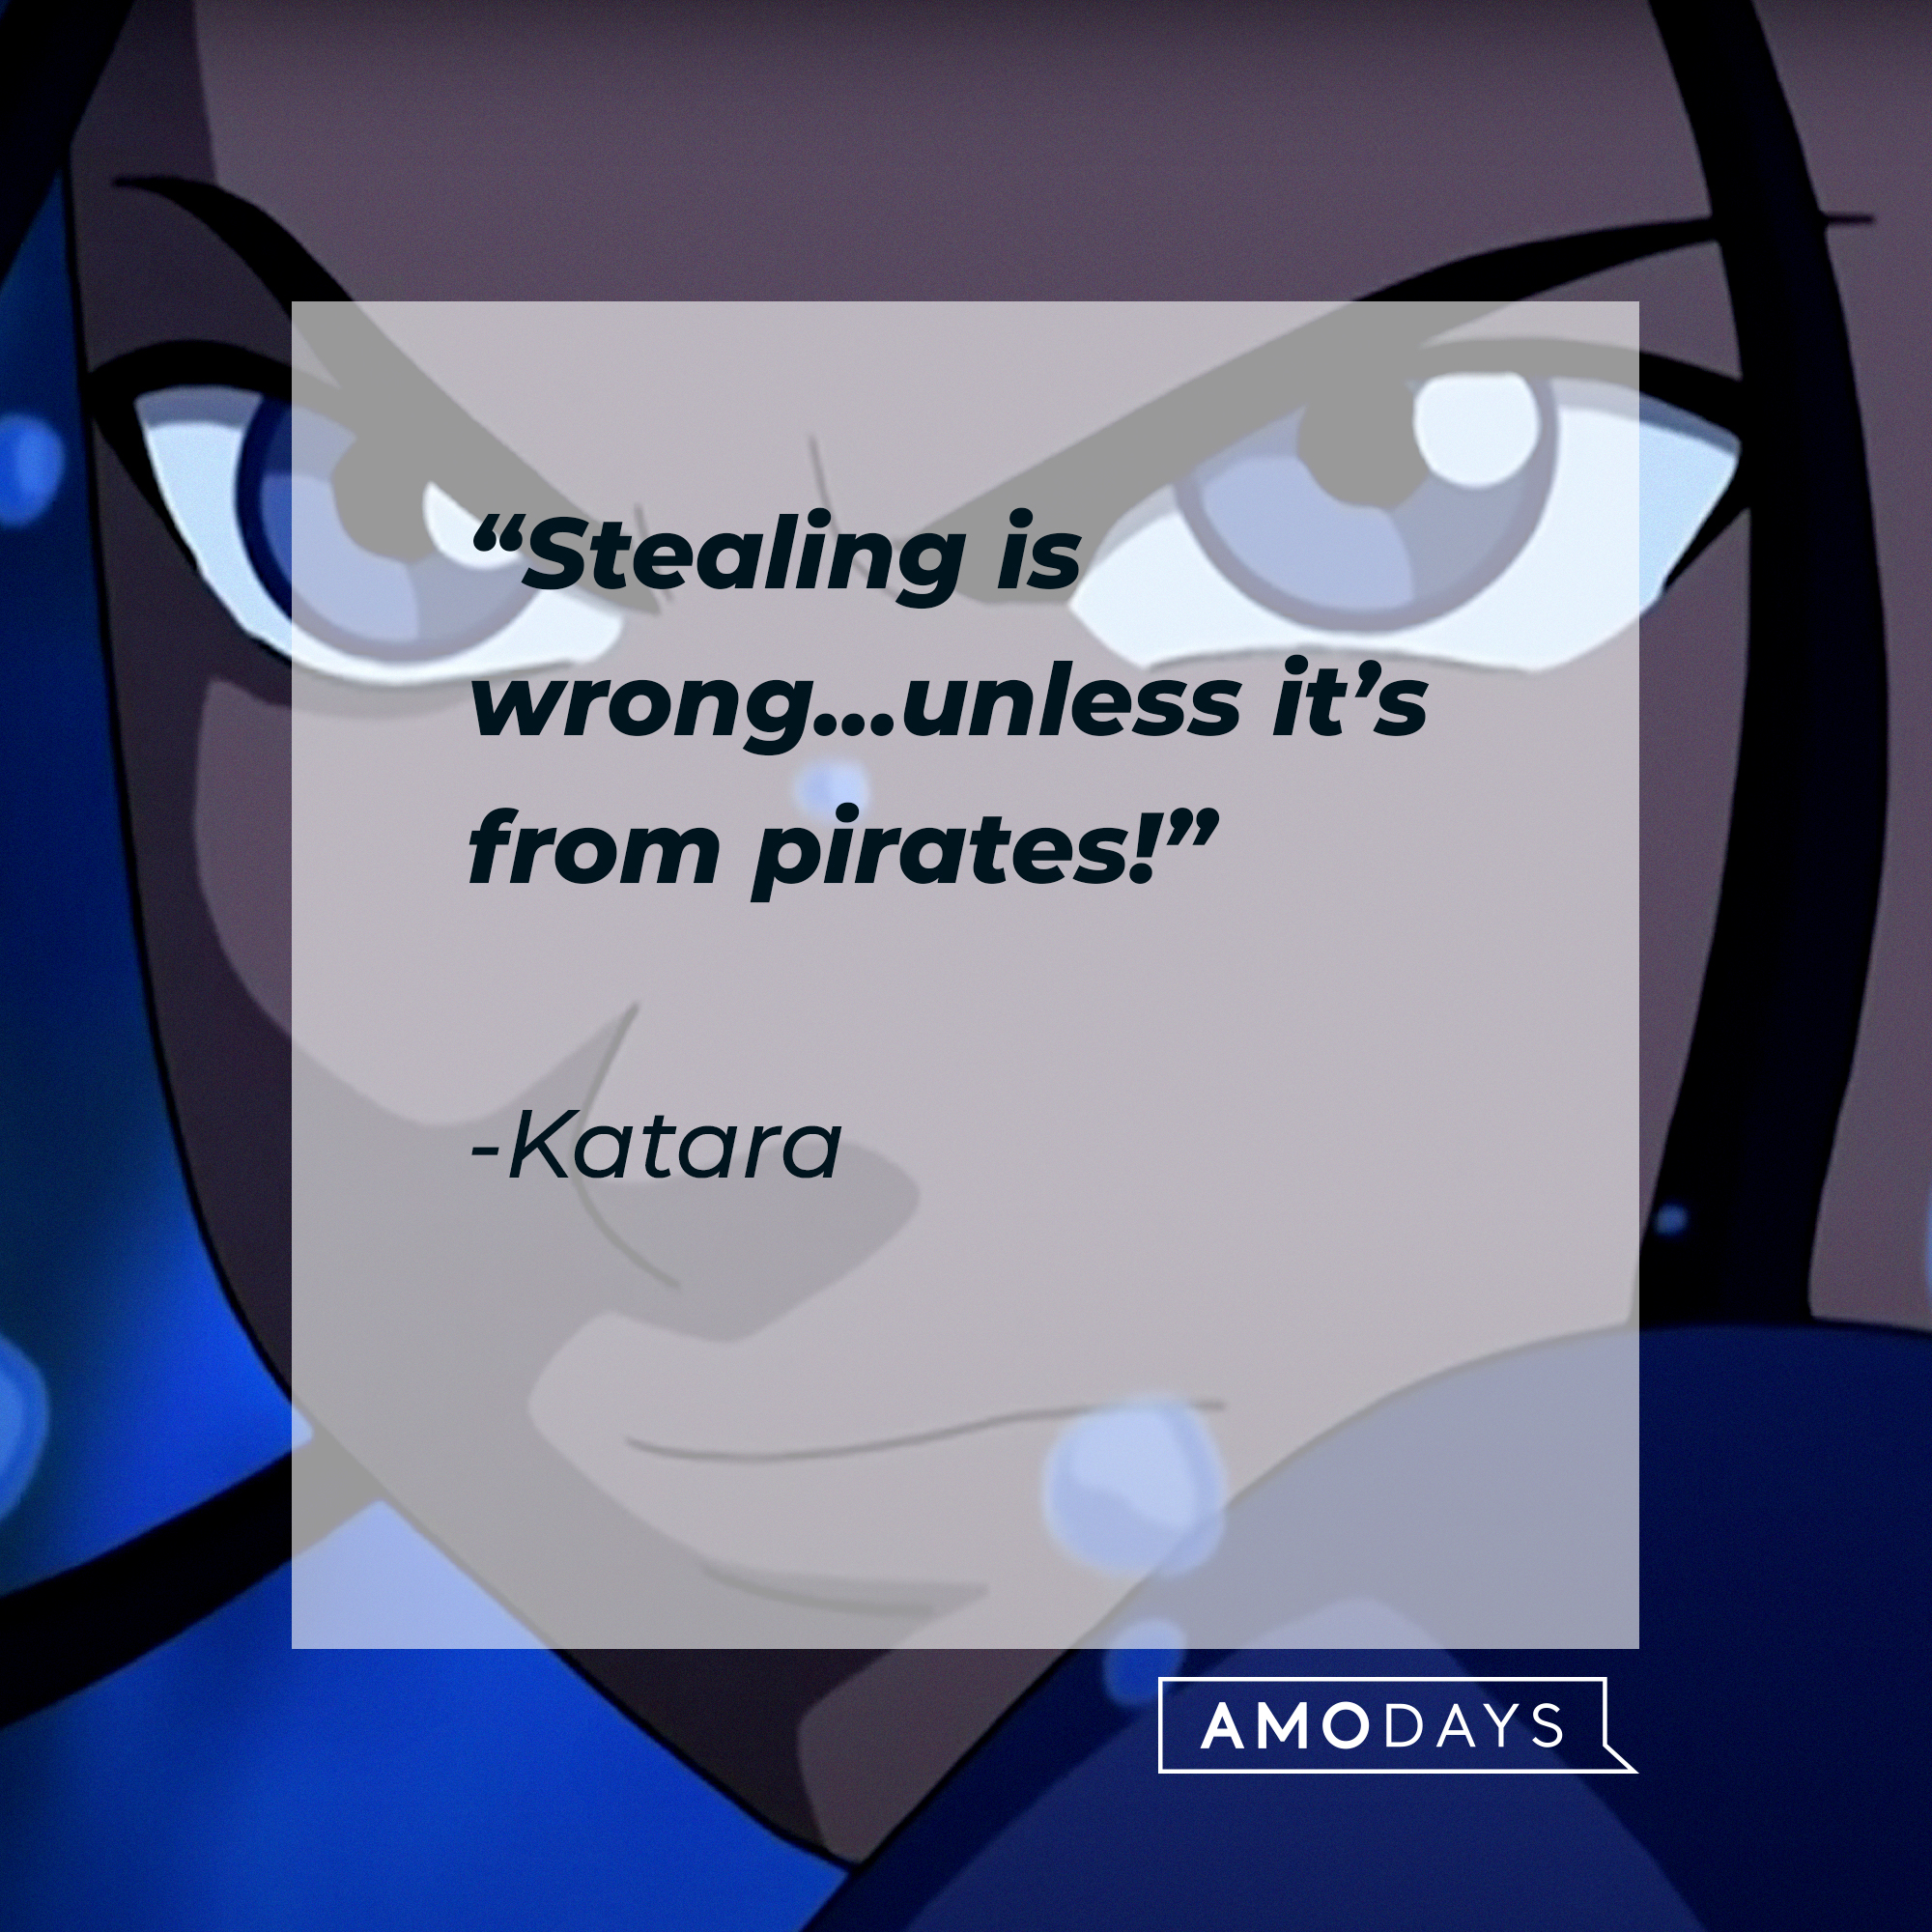 Katara, with her quote:  "Stealing is wrong... unless it’s from pirates!" | Source: Youtube.com/TeamAvatar